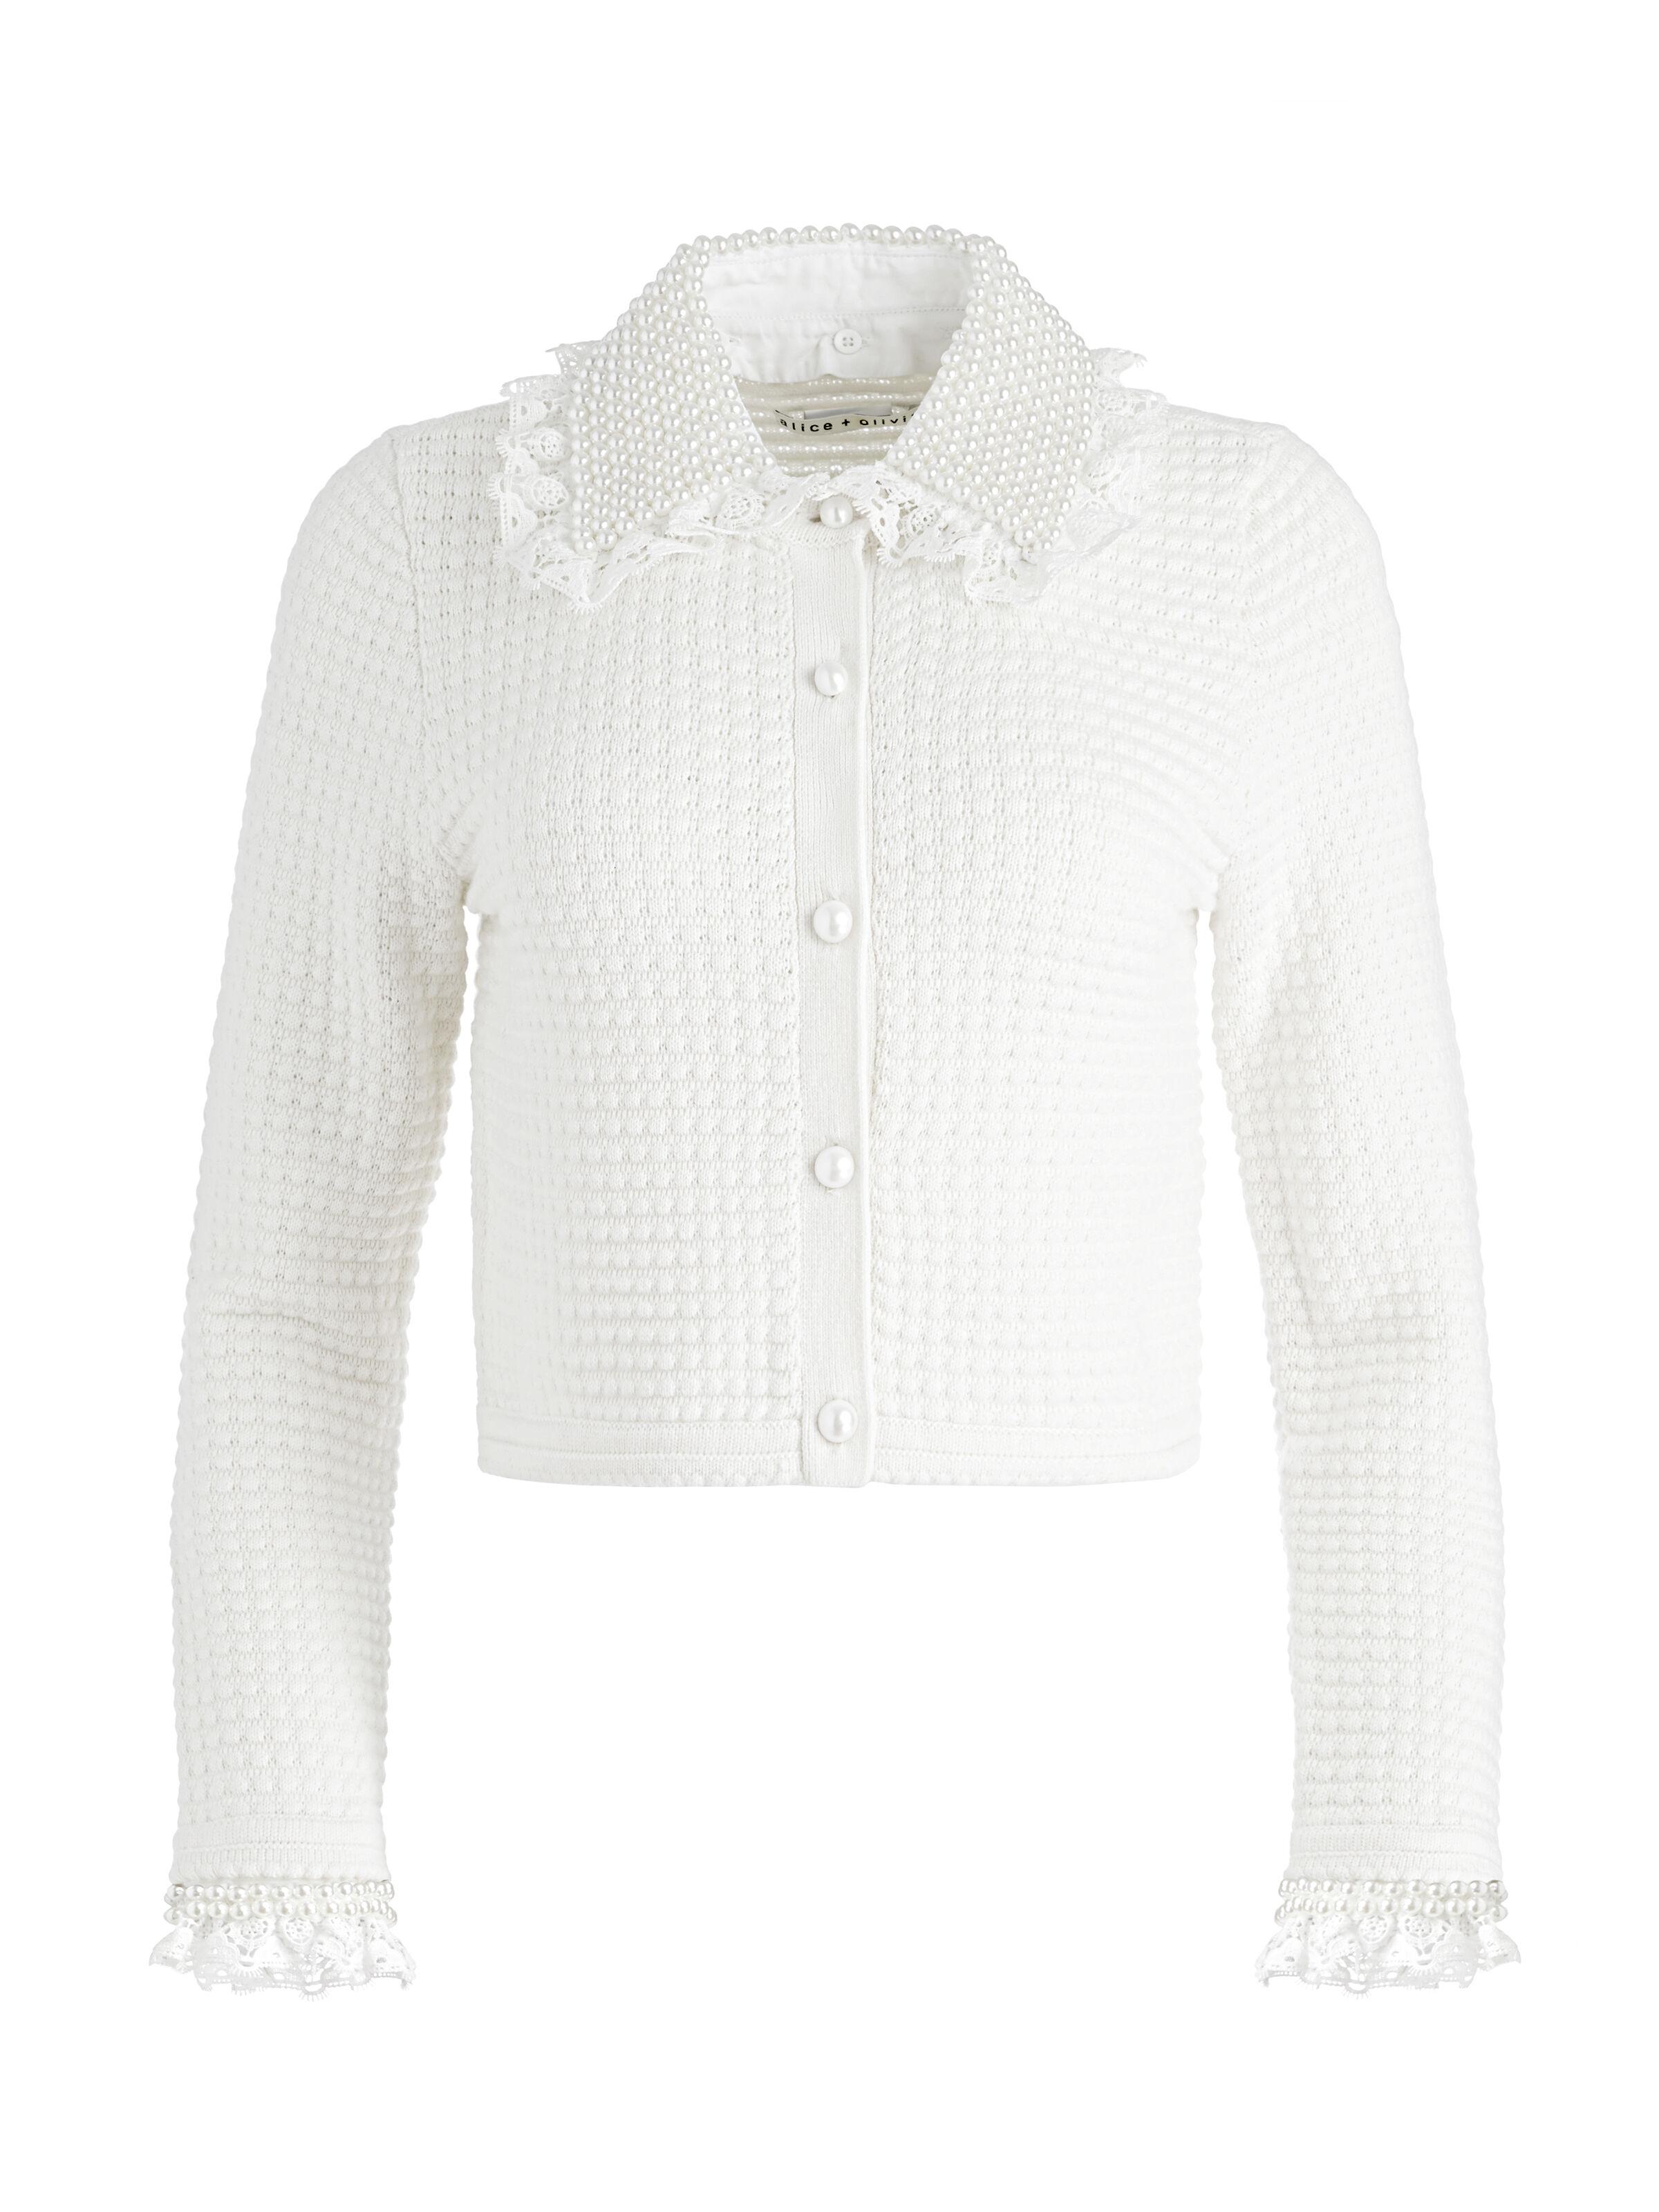 Alice + Olivia Noella Embellished Collared Cardigan in White | Lyst